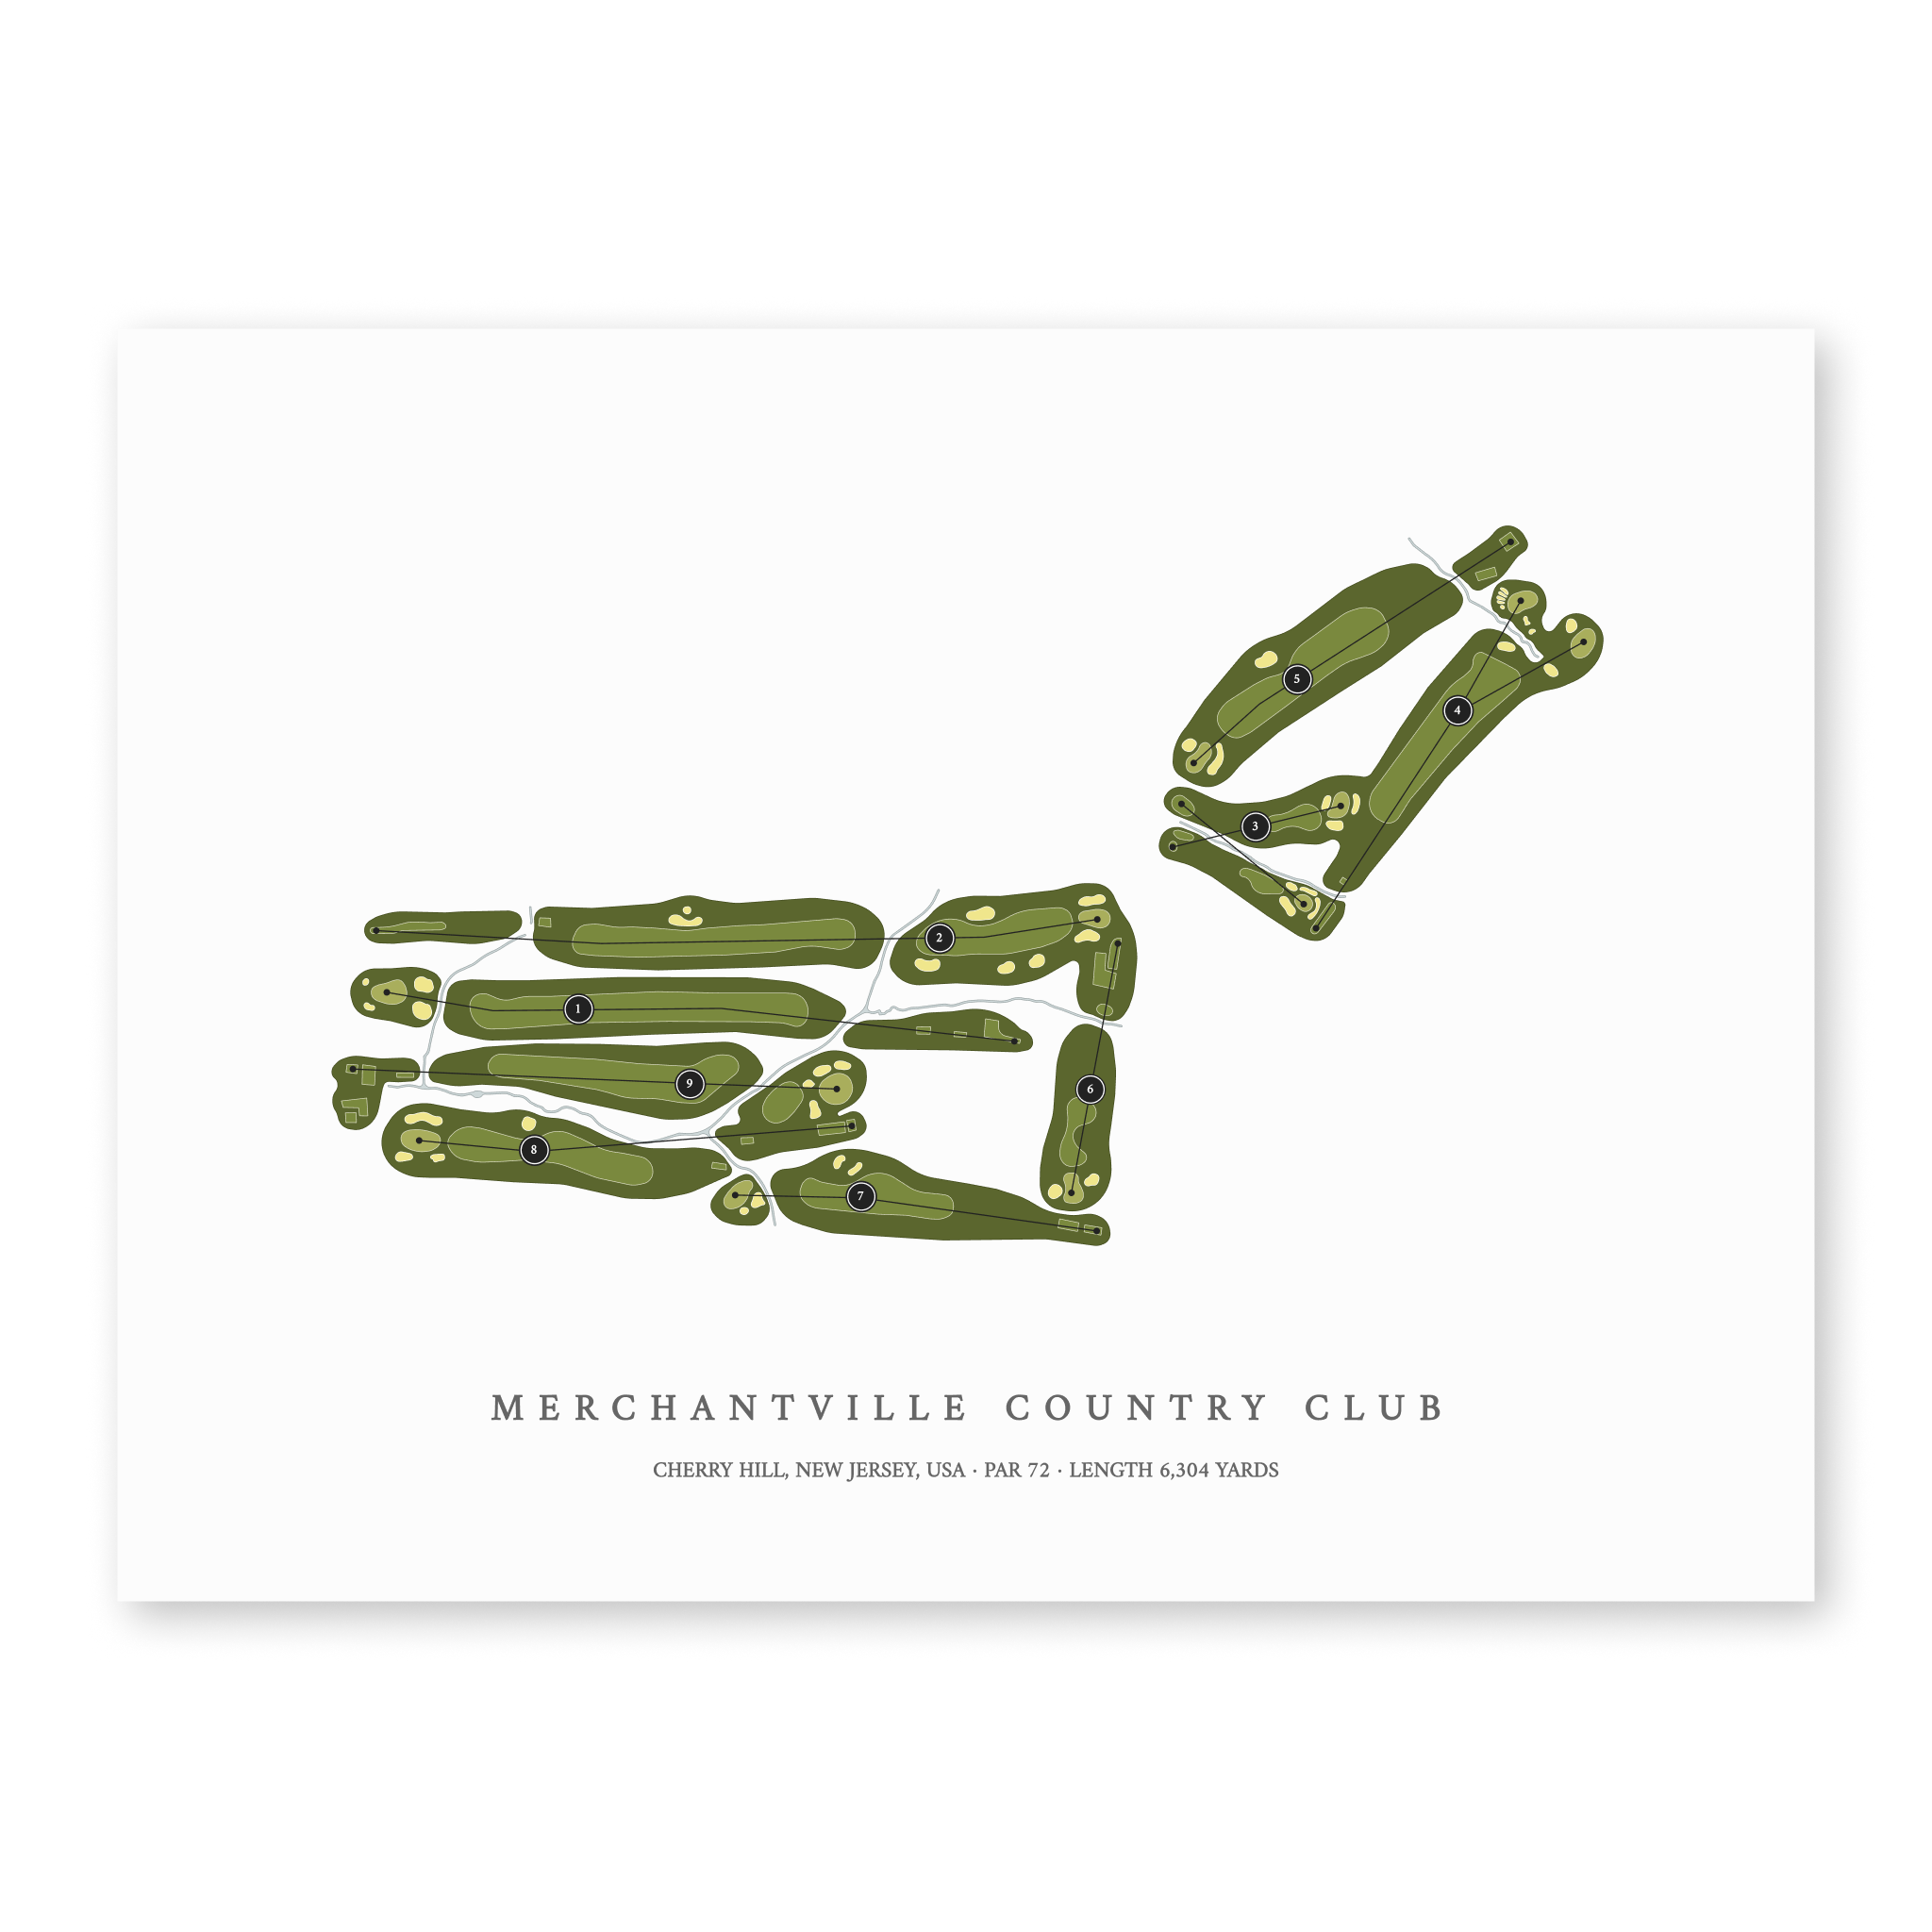 Merchantville Country Club | Golf Course Map | Unframed With Hole Numbers #hole numbers_yes